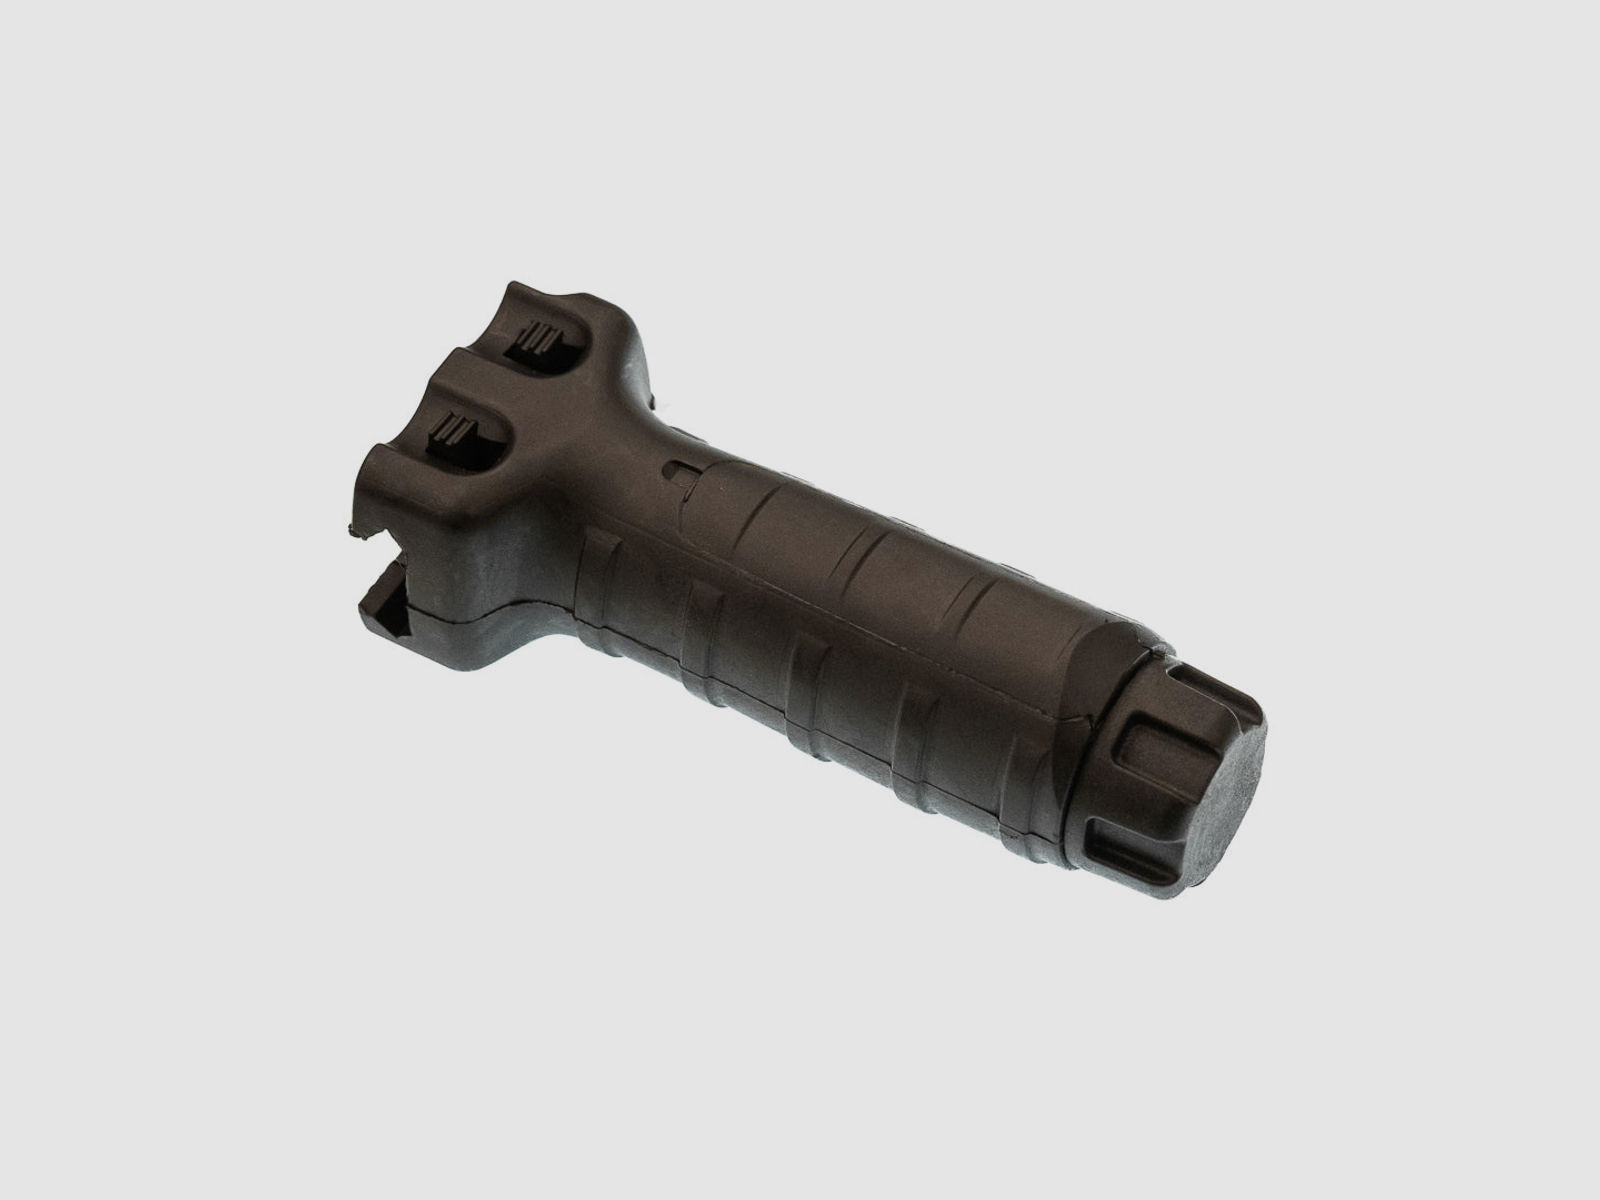 FRONT GRIP | FOREGRIP | 20mm Rail System | Front Griff | Airsoft | HDR68 | HDS68 | HDX68 | M17